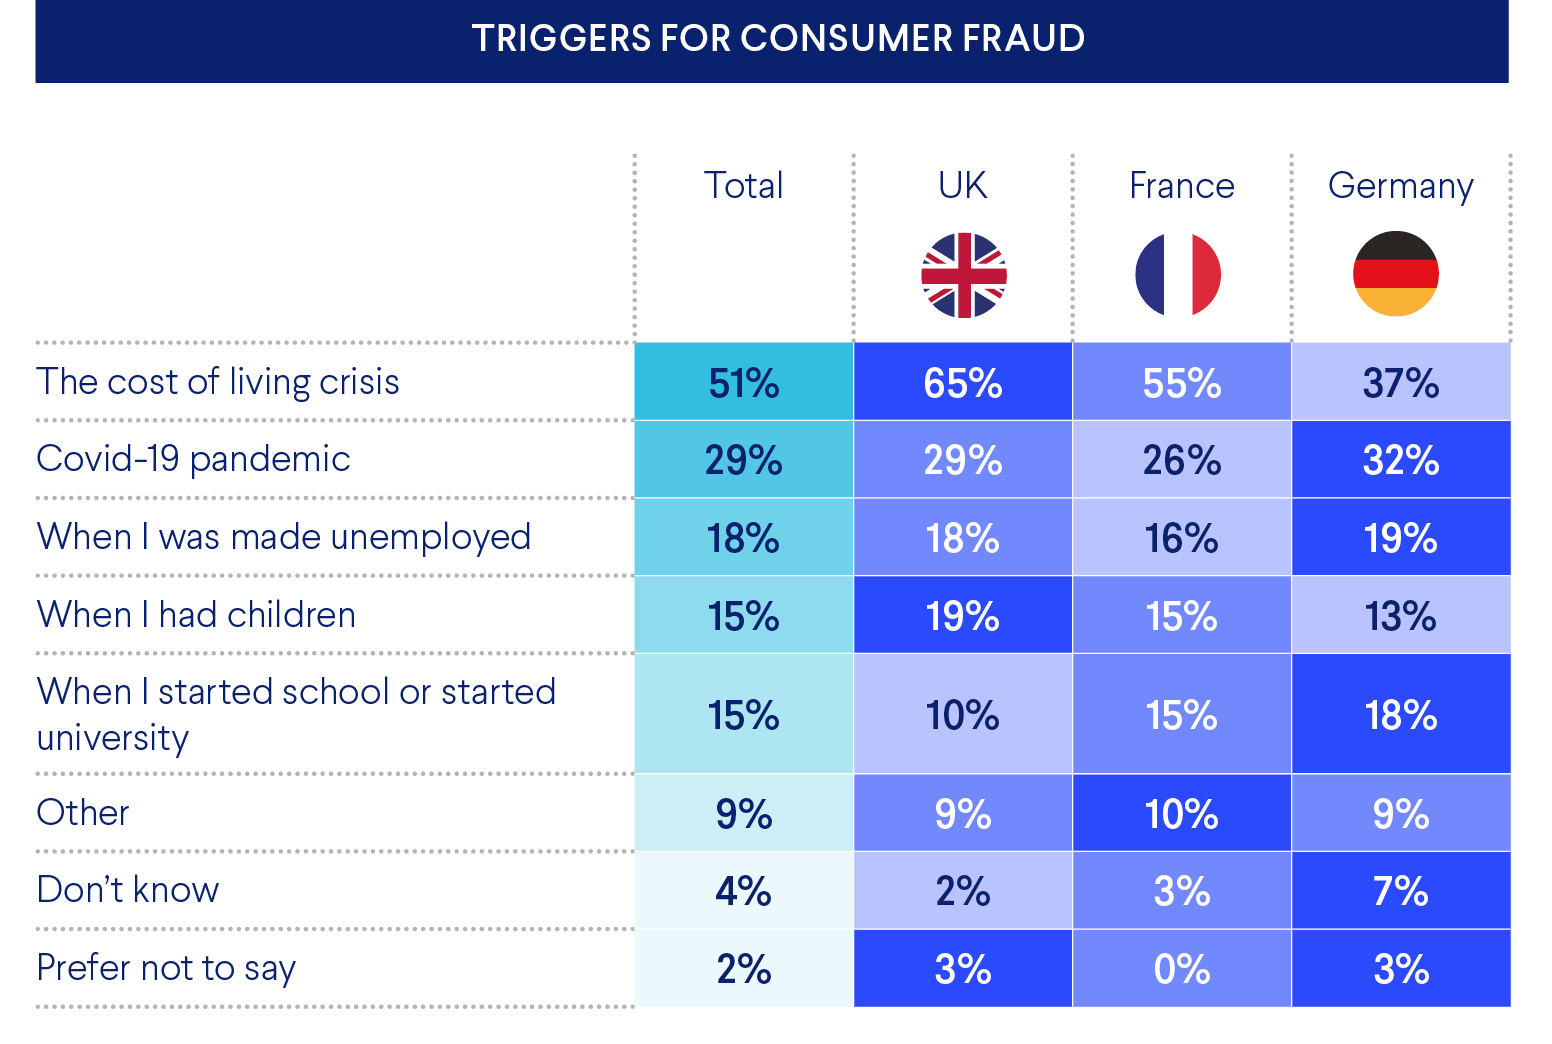 Triggers for consumer fraud